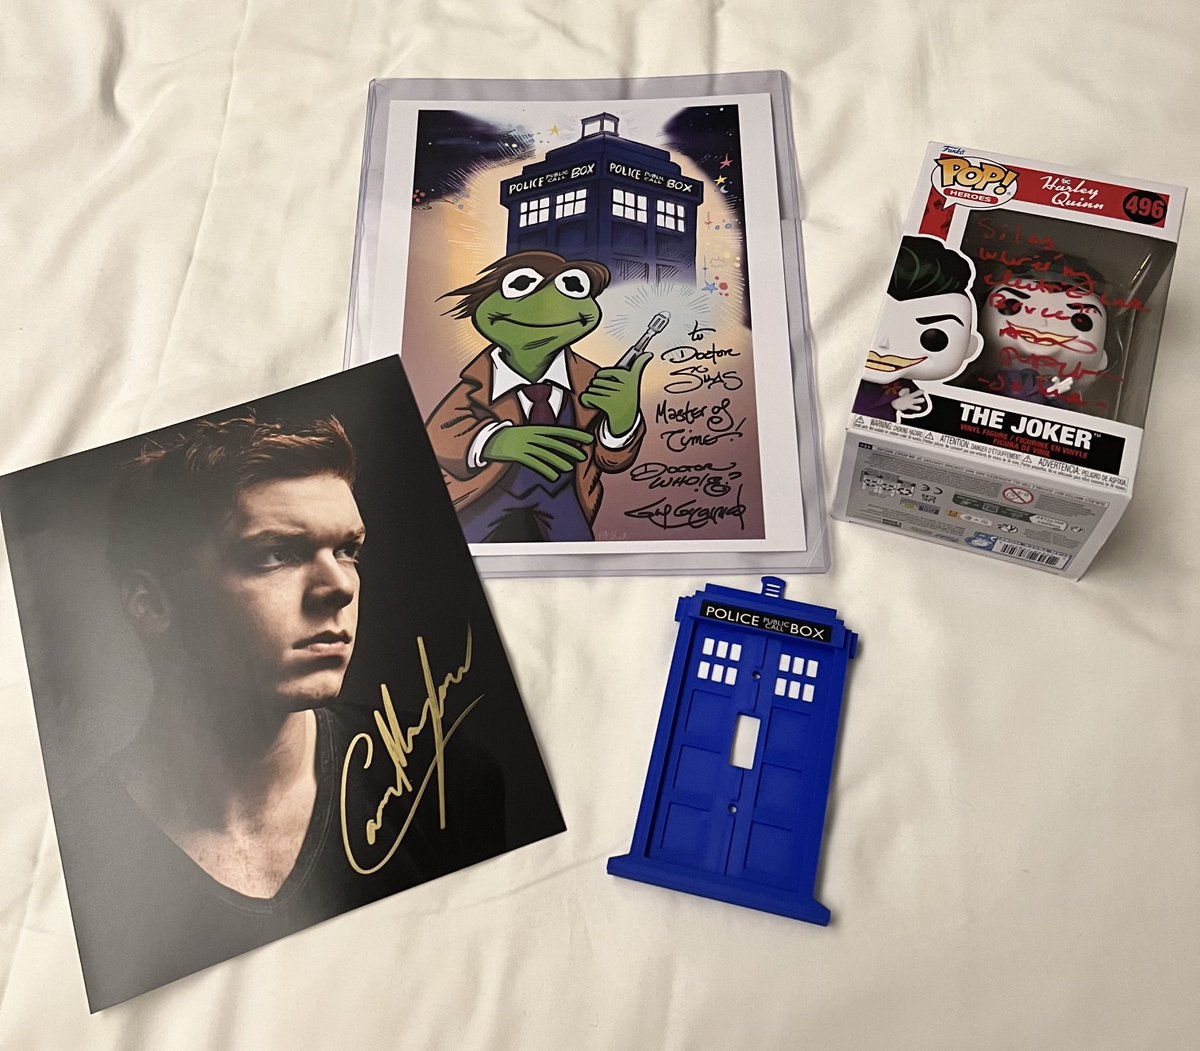 My haul today. #PhillyFanExpo

My brother and nephew did great, I'm really proud of them. Bro was really supportive and calmed me down for my interactions.
I was there for the three people and all were successful! I could talk and they seemed to really enjoy chatting with me 😀💜